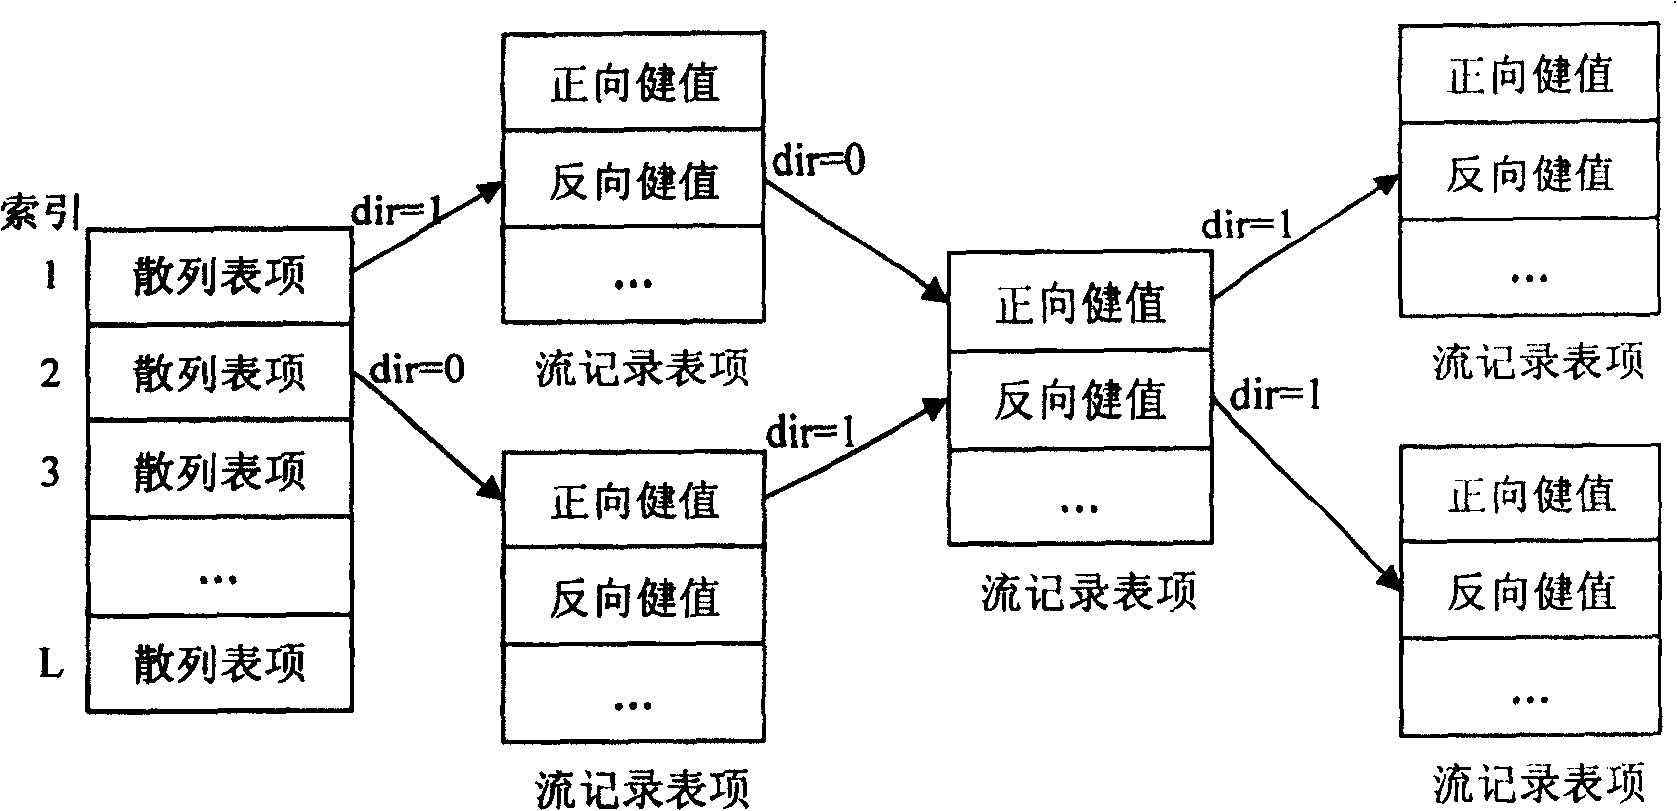 Network flow classifying, state tracking and message processing device and method